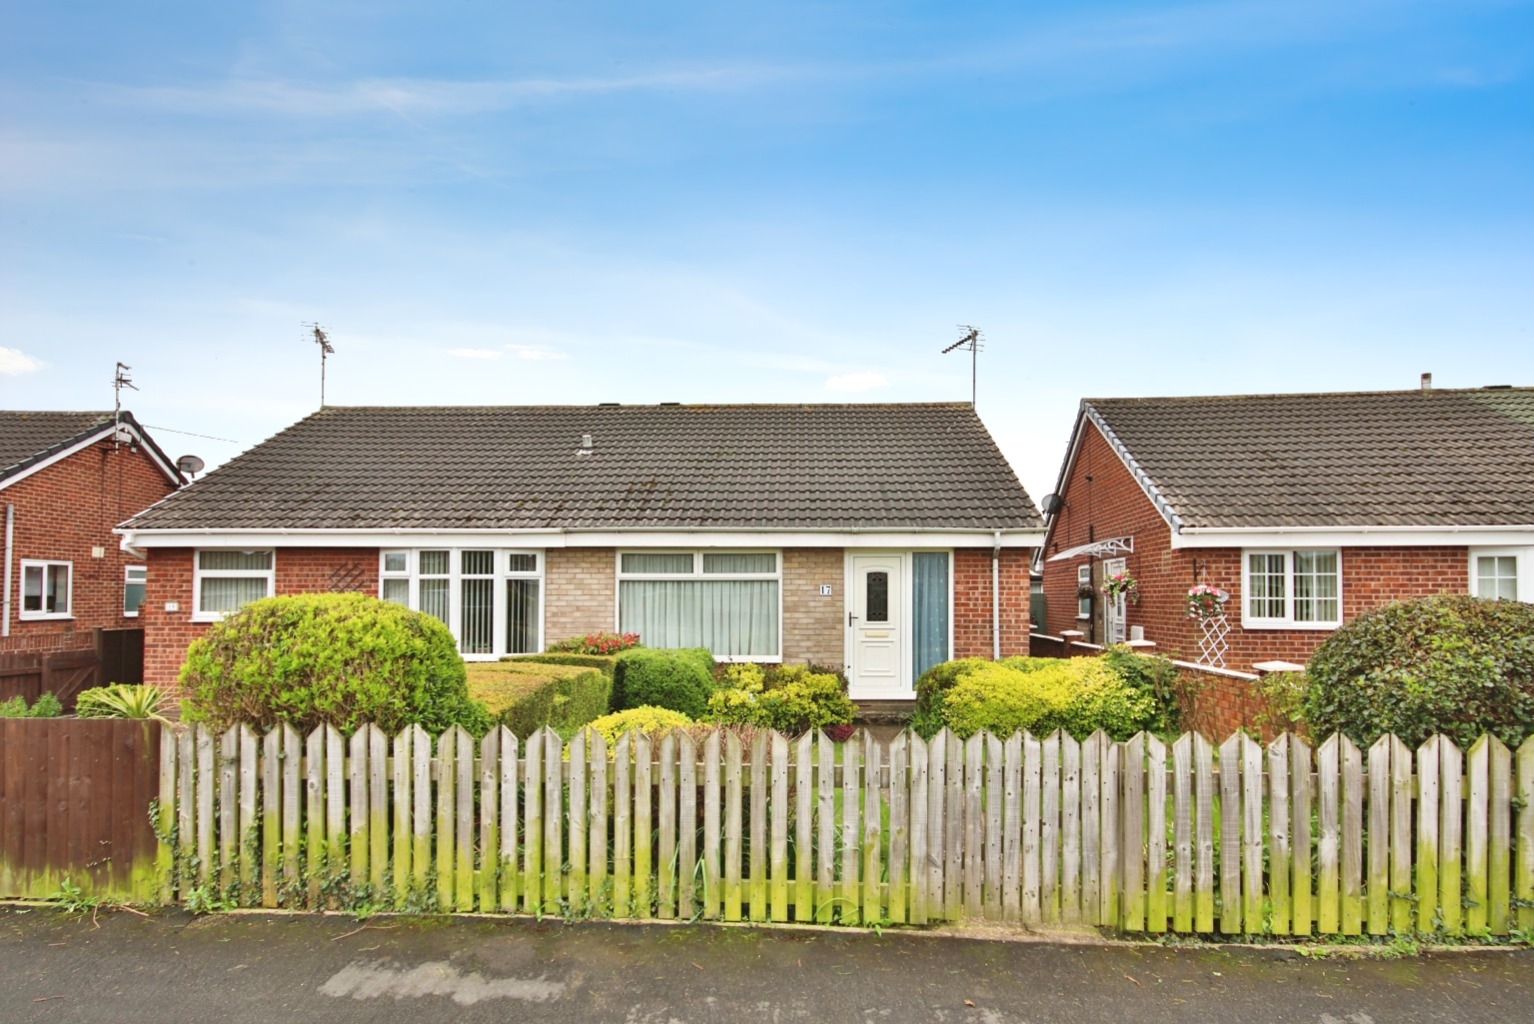 2 bed bungalow for sale in Stonesdale, Hull - Property Image 1